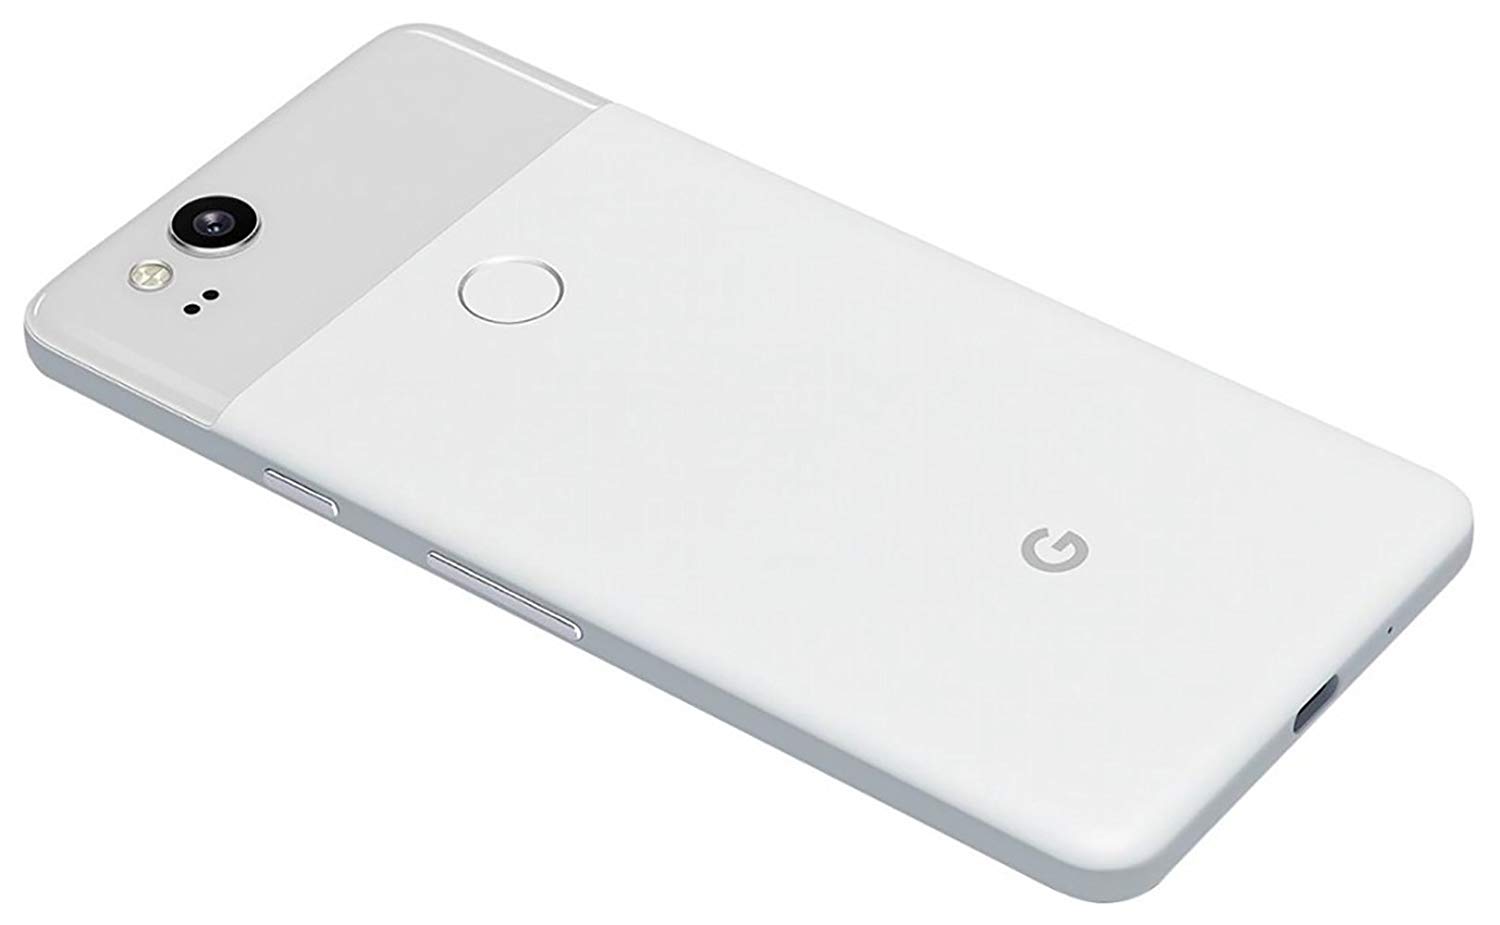 Restored Google Pixel 2 Factory Unlocked 64GB Clearly White (Refurbished) - image 2 of 8